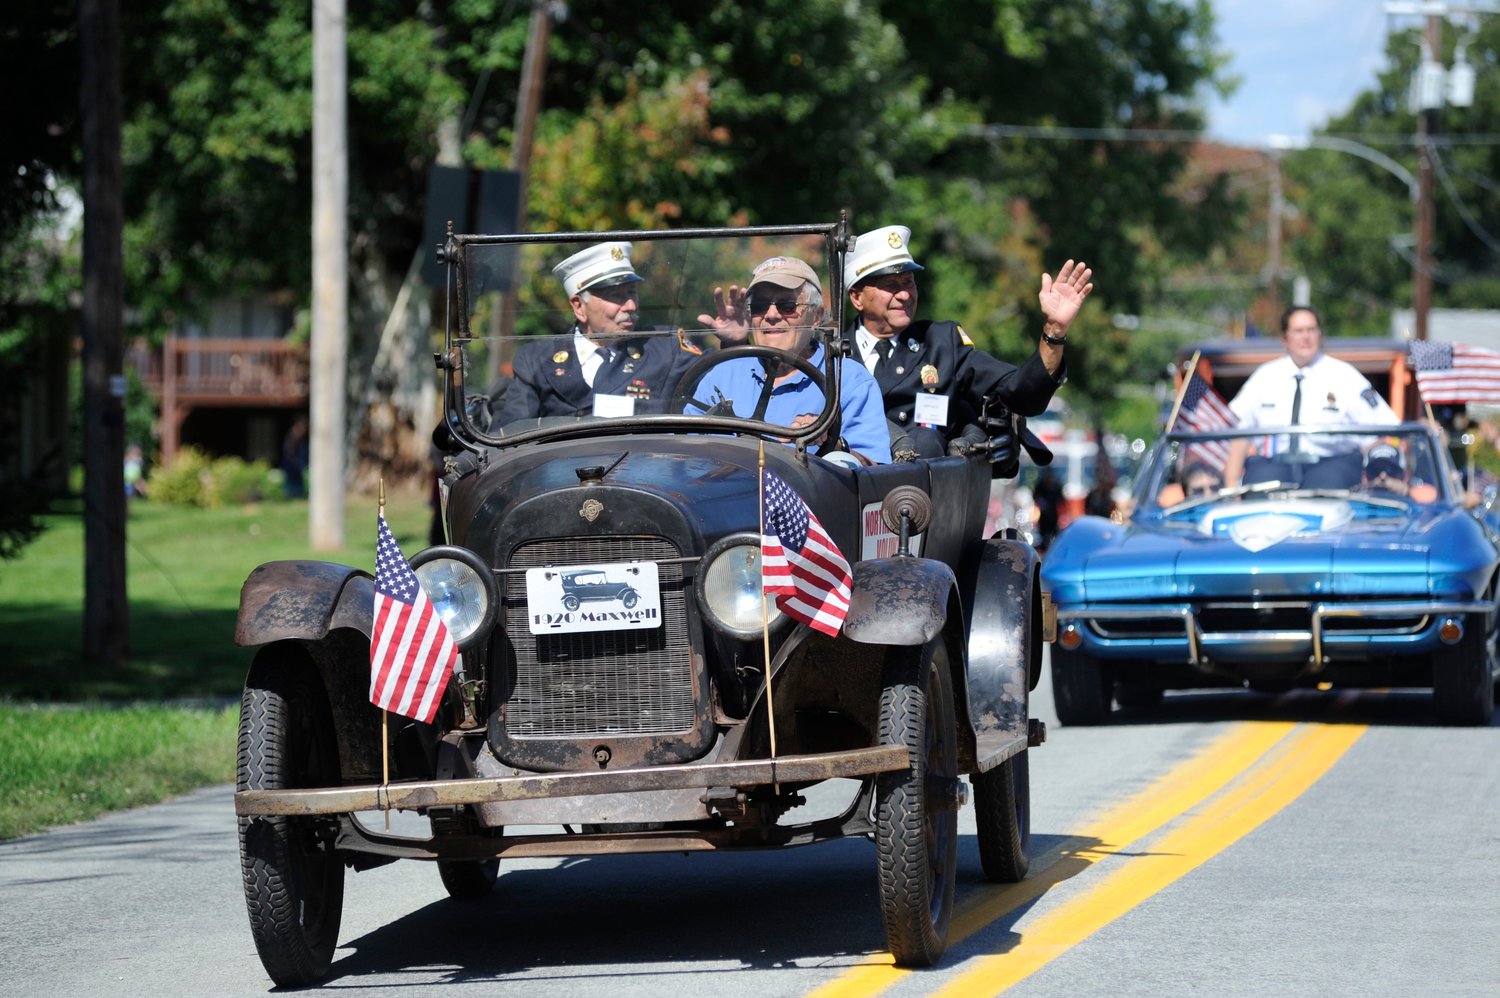 The Northeast Pennsylvania Volunteer Firemen’s Federation was on hand to celebrate their 91st Anniversary in a 1920 Maxwell touring car.